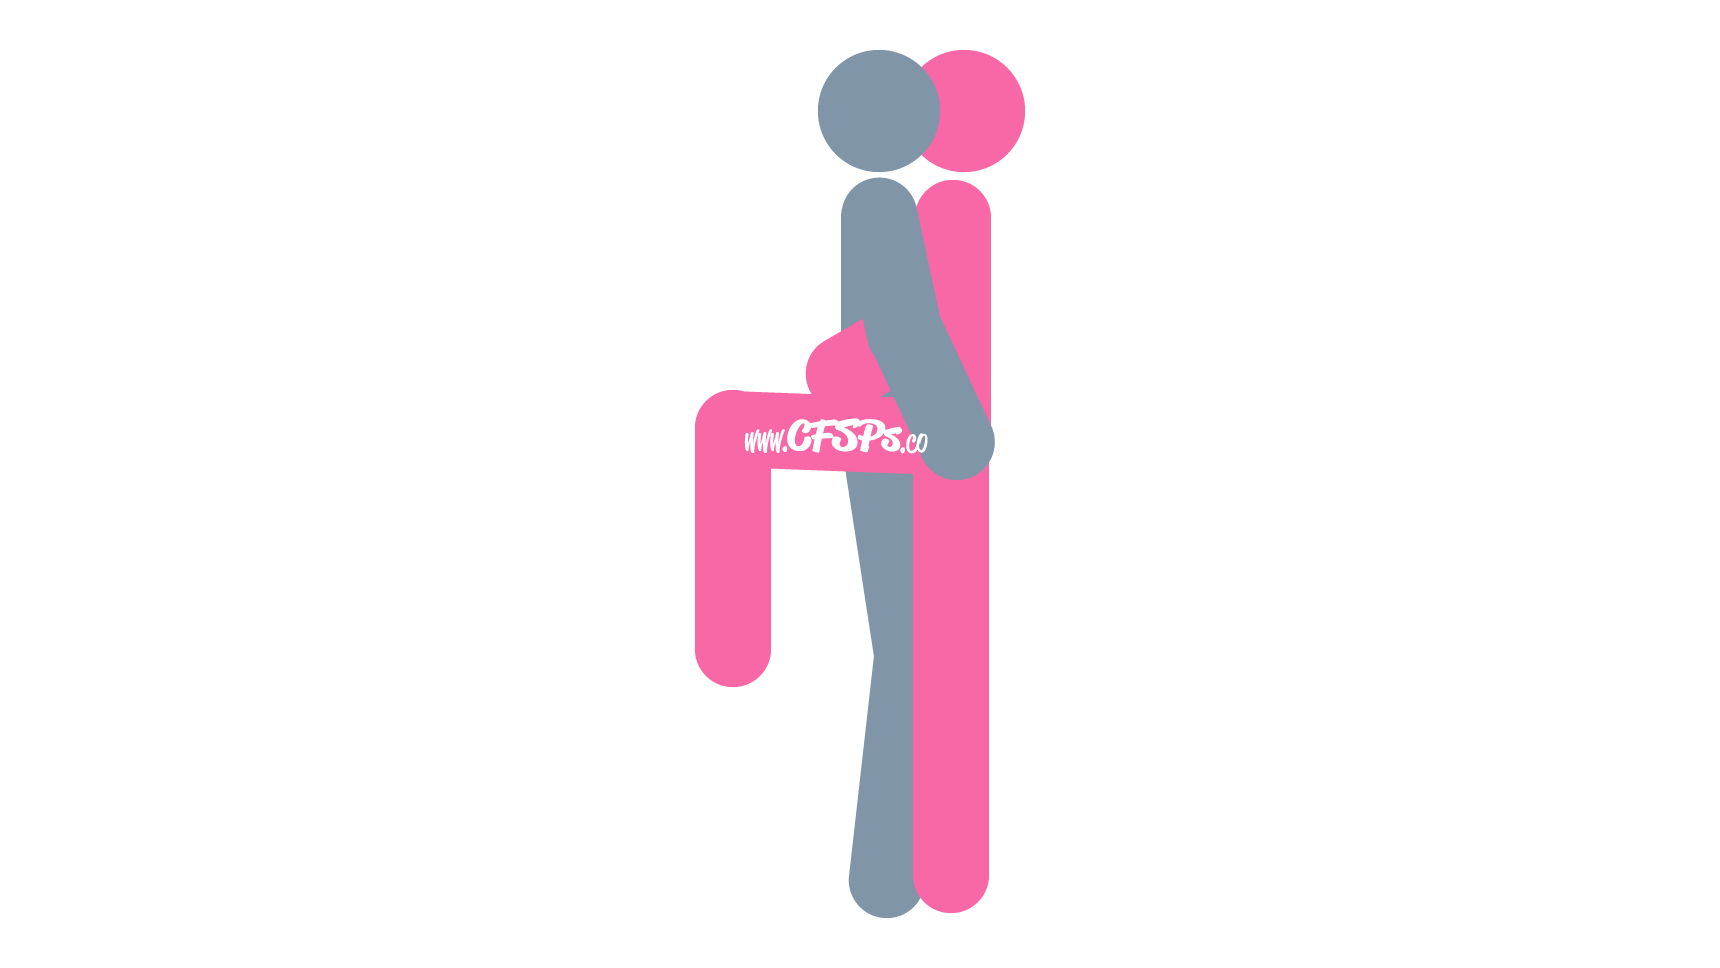 This stick figure image depicts a man and woman having sex in the Pink Flamingo sex position. The woman is standing on one leg with the other leg up at a 90-degree angle and knee bent with her foot on a stool or chair. The man is standing before her with his hands on her butt.